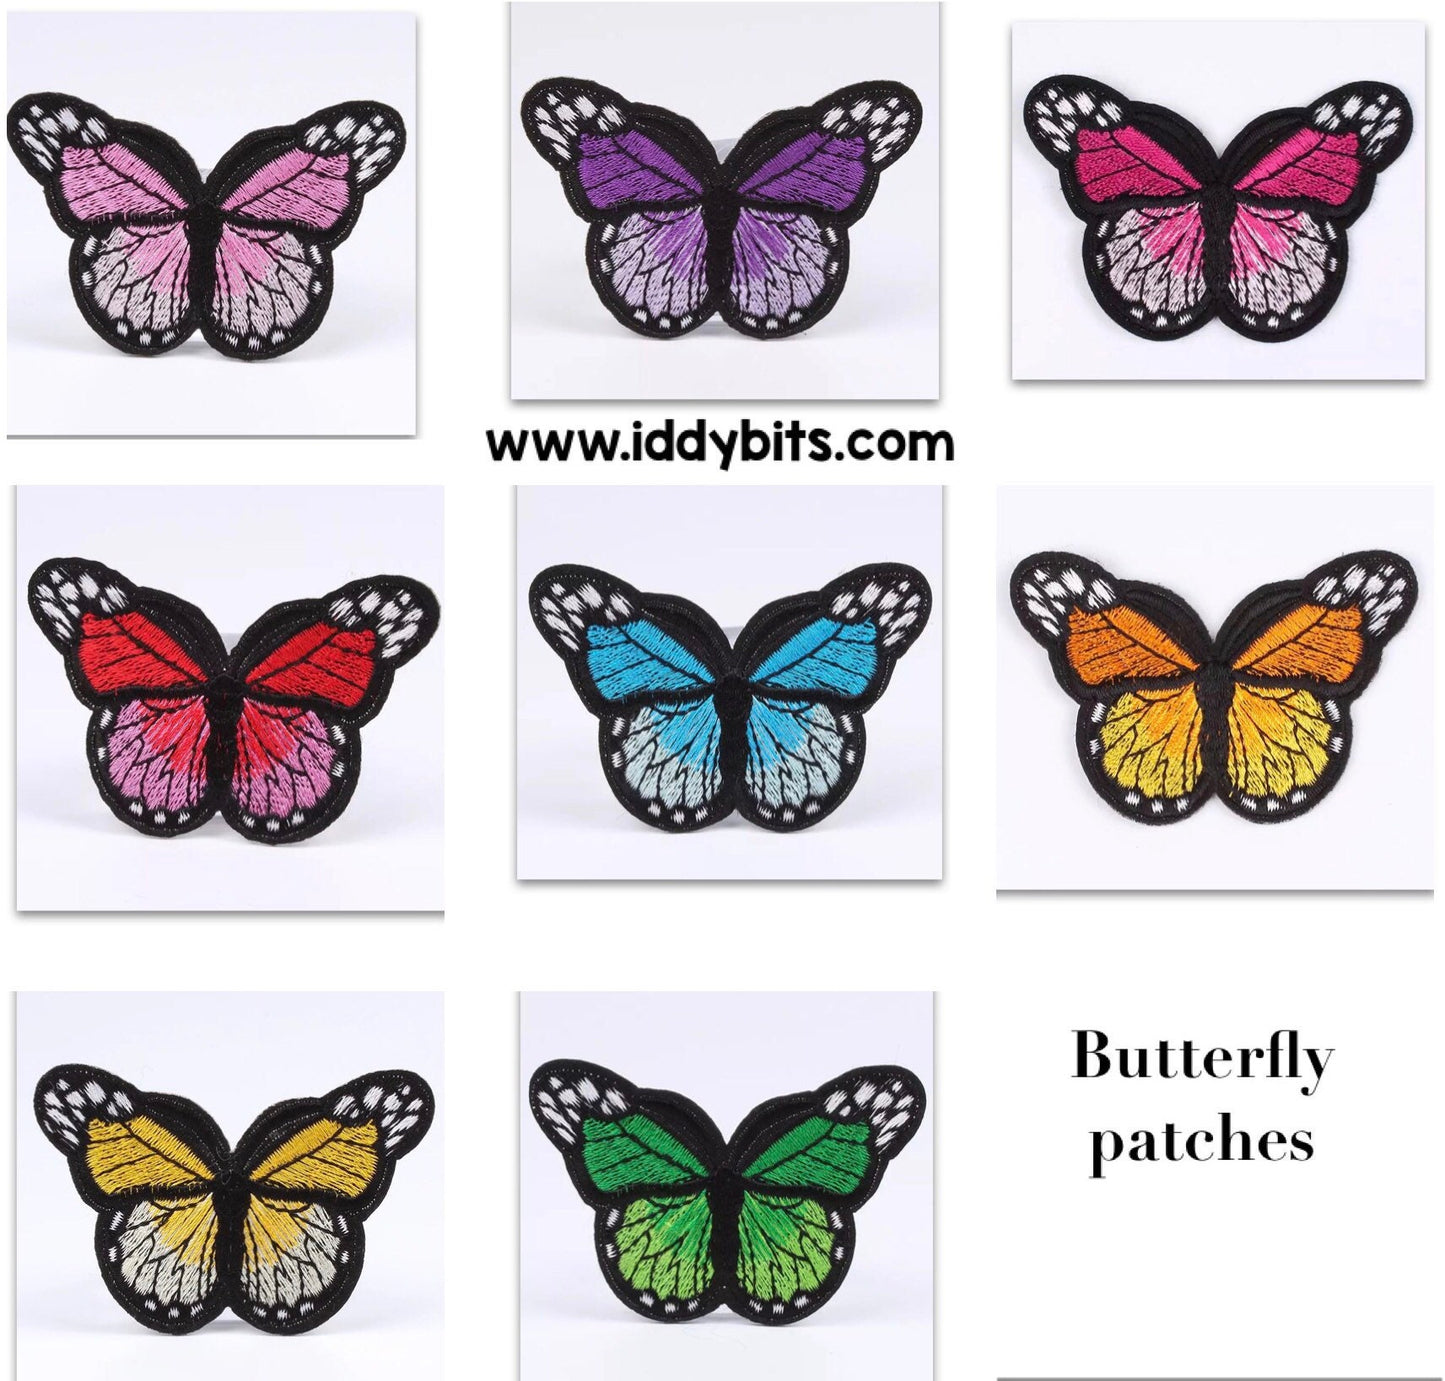 Red mini butterfly patches